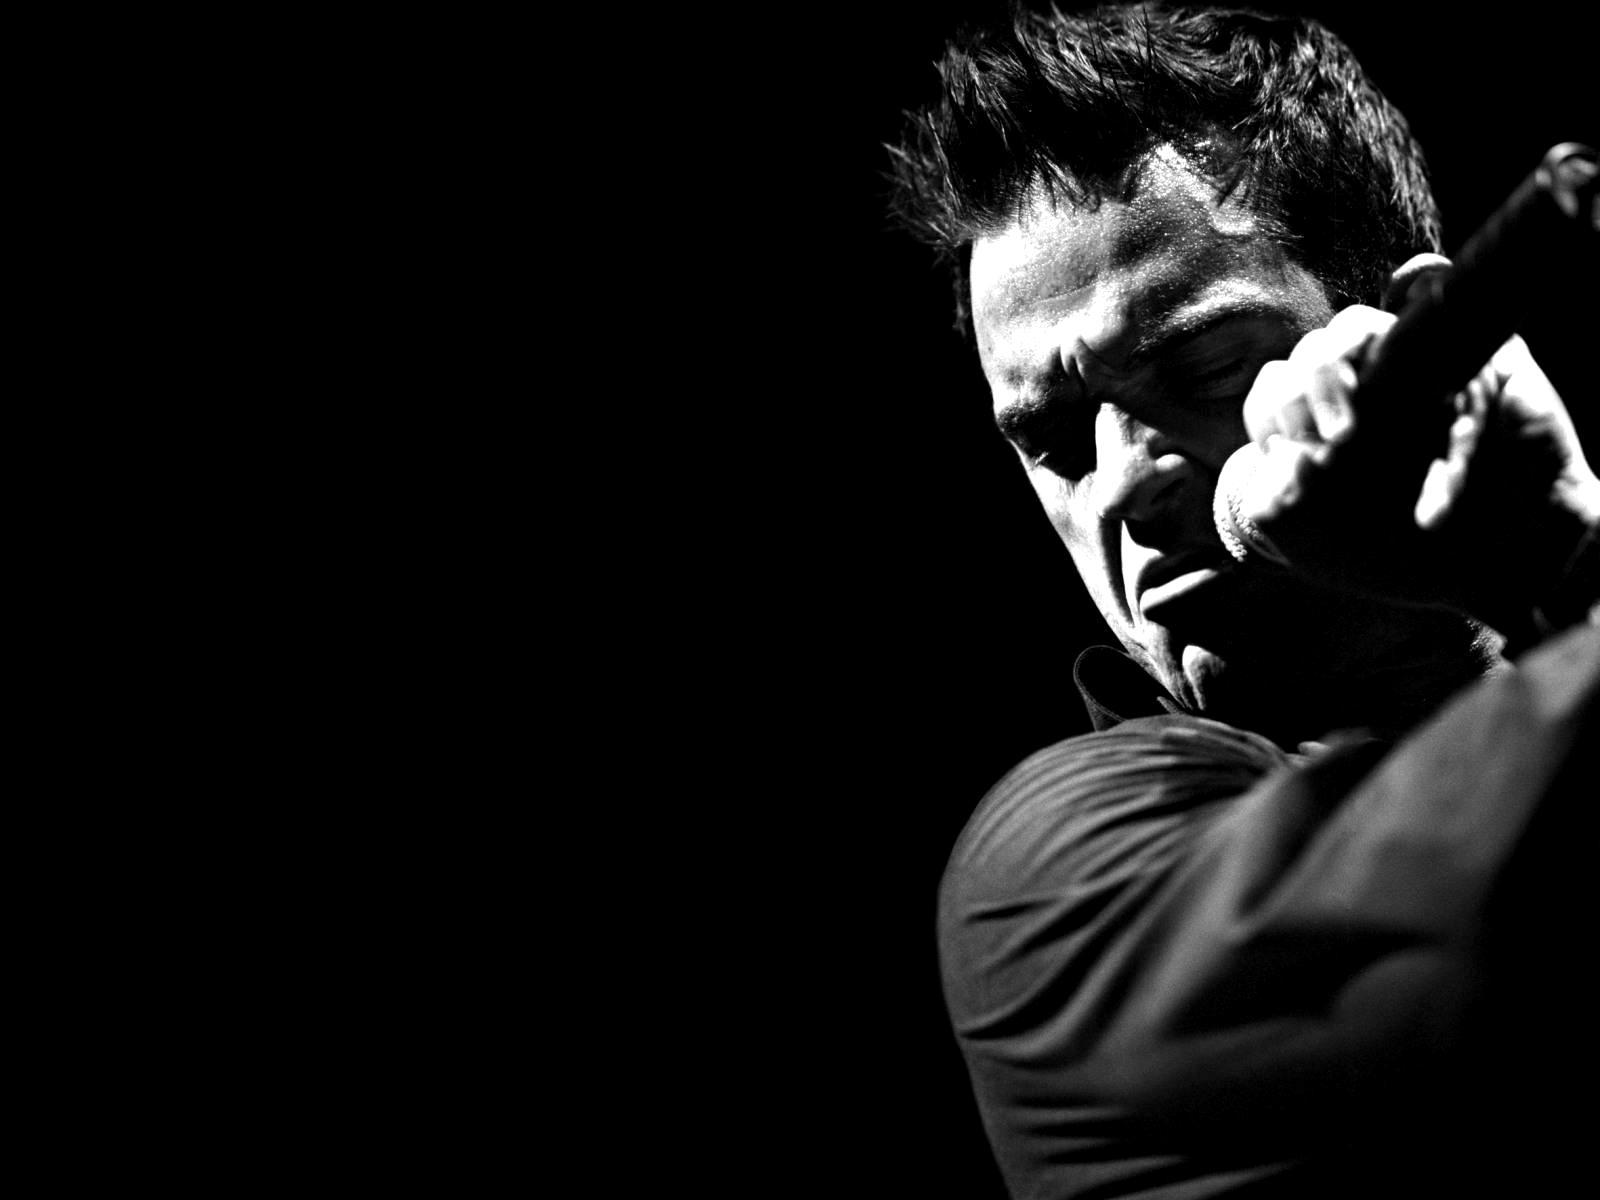 Robbie Williams Wallpapers